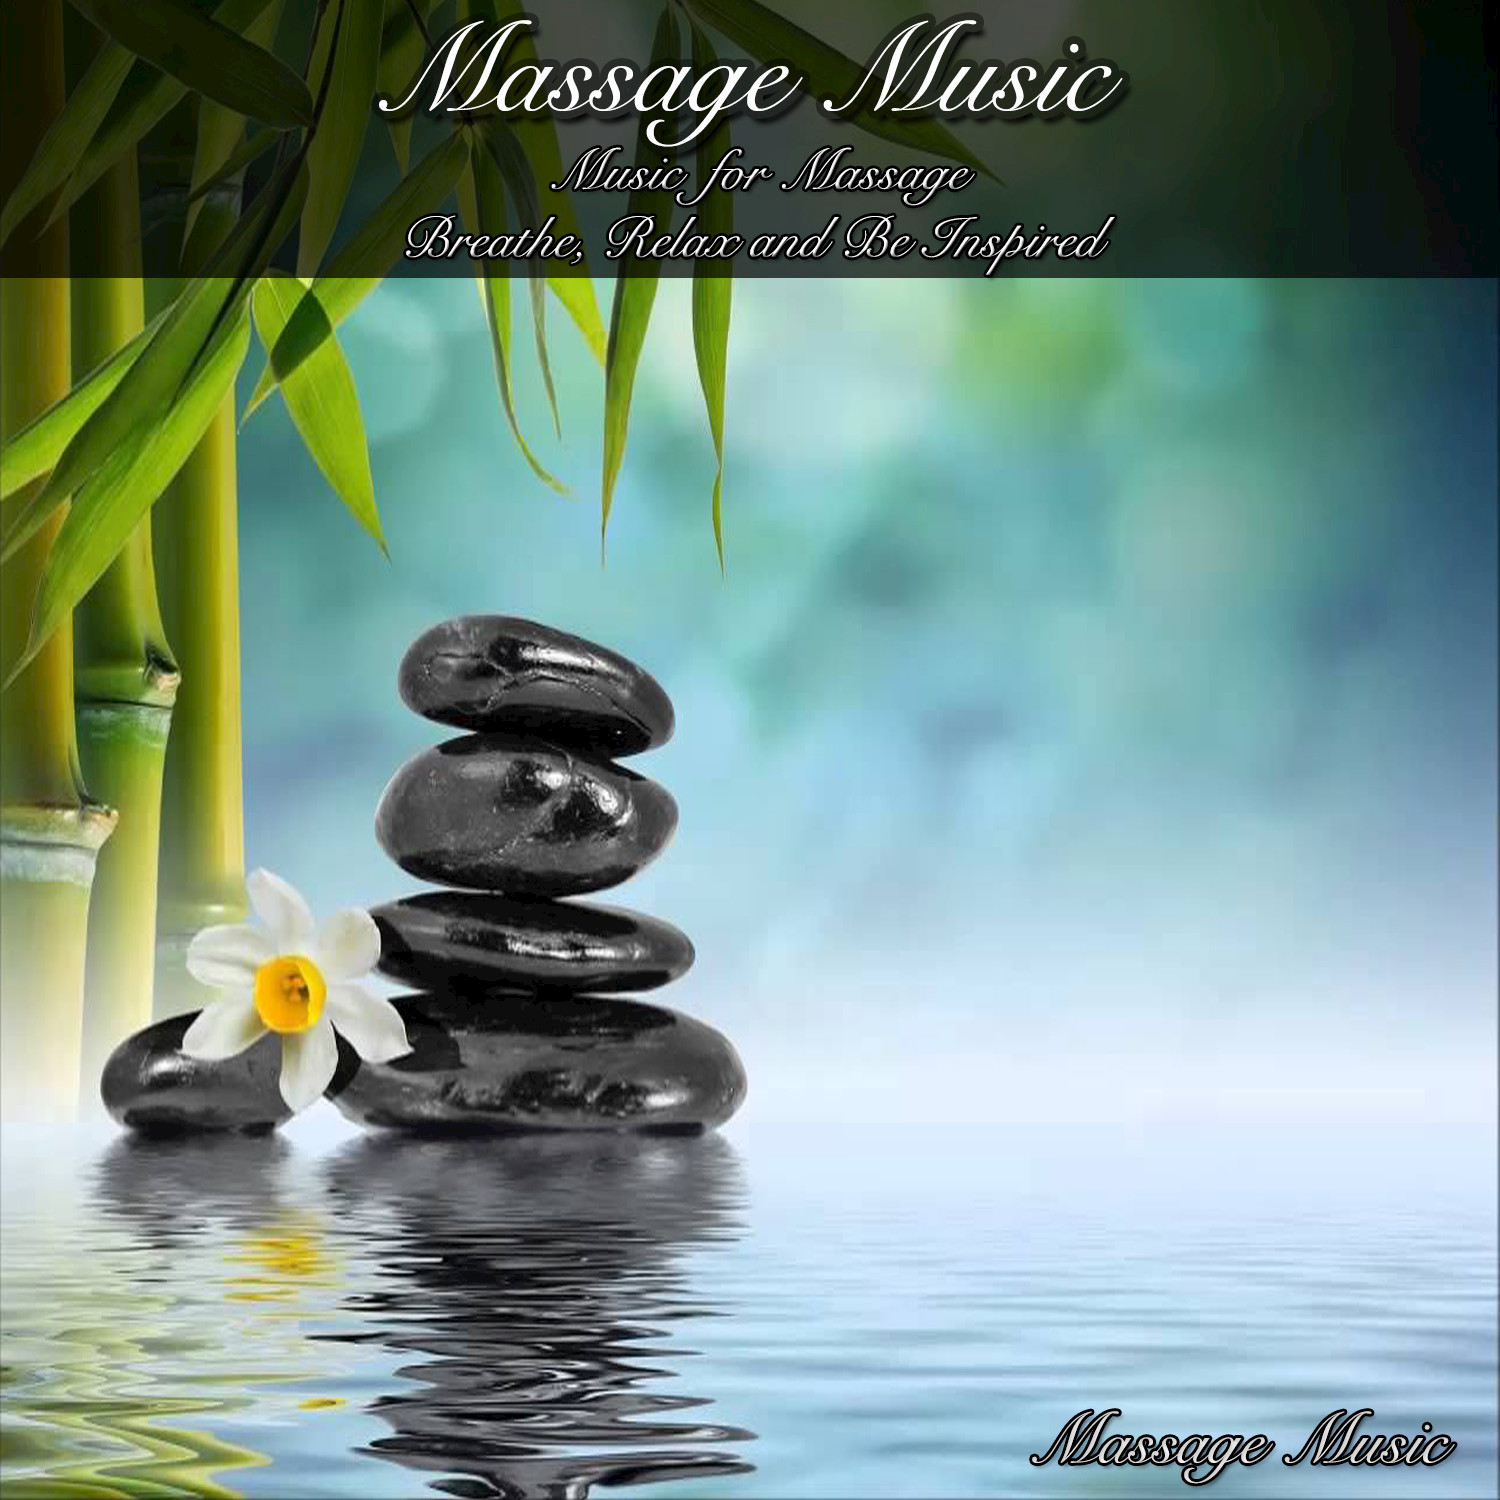 Massage Music Music for Massage Breathe, Relax, and Be Inspired